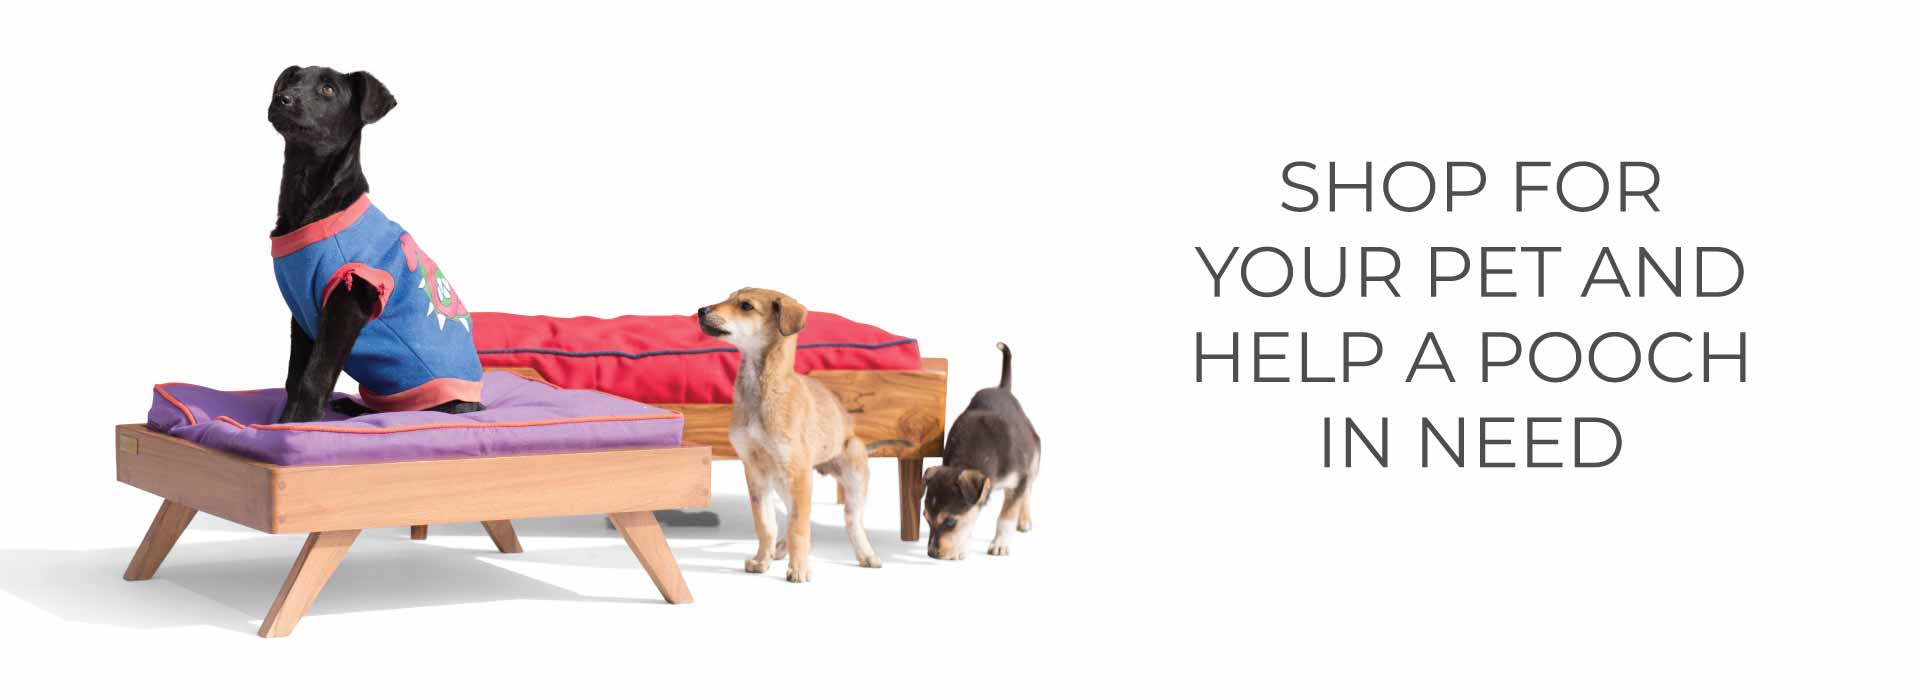 Buy furniture online for pets - Lap and Dado pet beds and pet feeding stations for dogs and cats